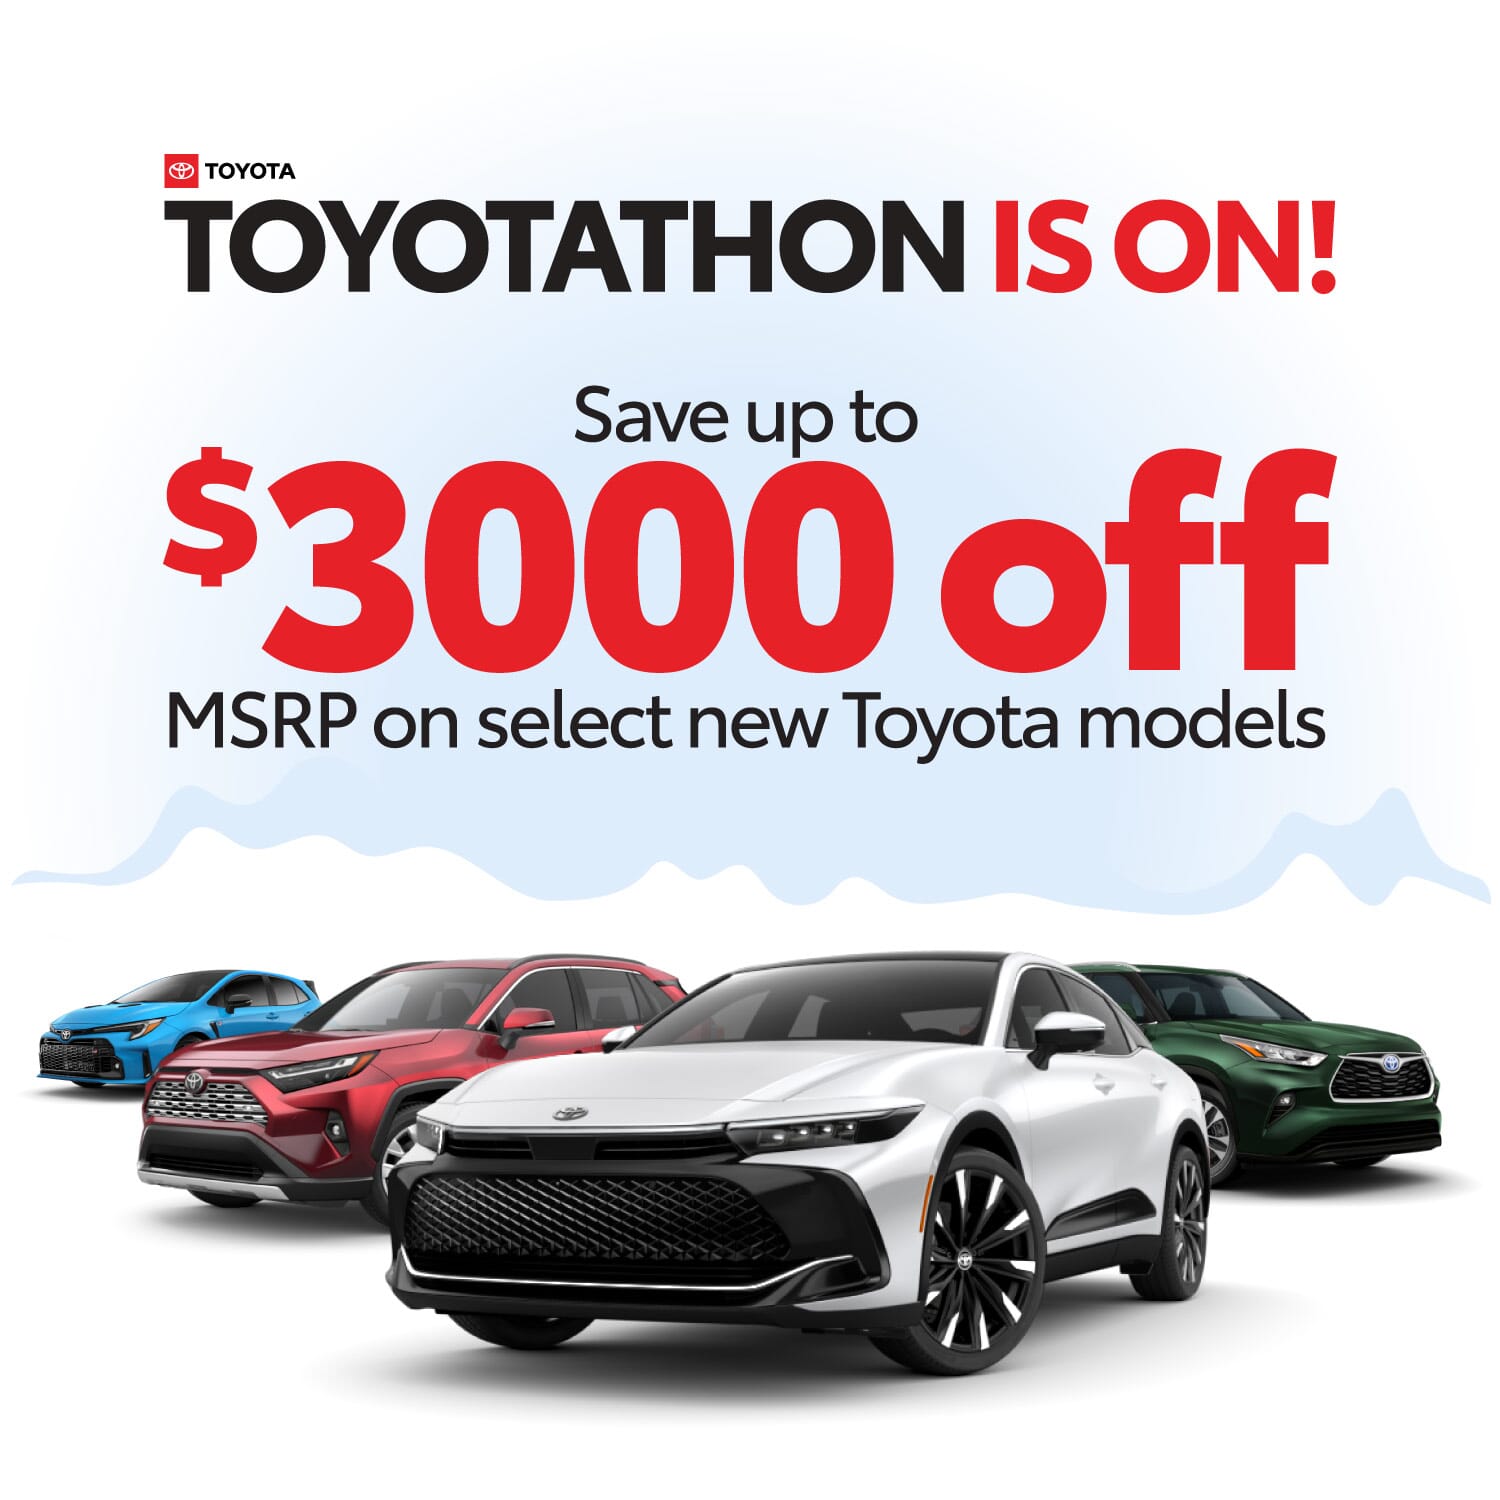 Miami Toyota dealer: $3000 off MSRP on new Toyota